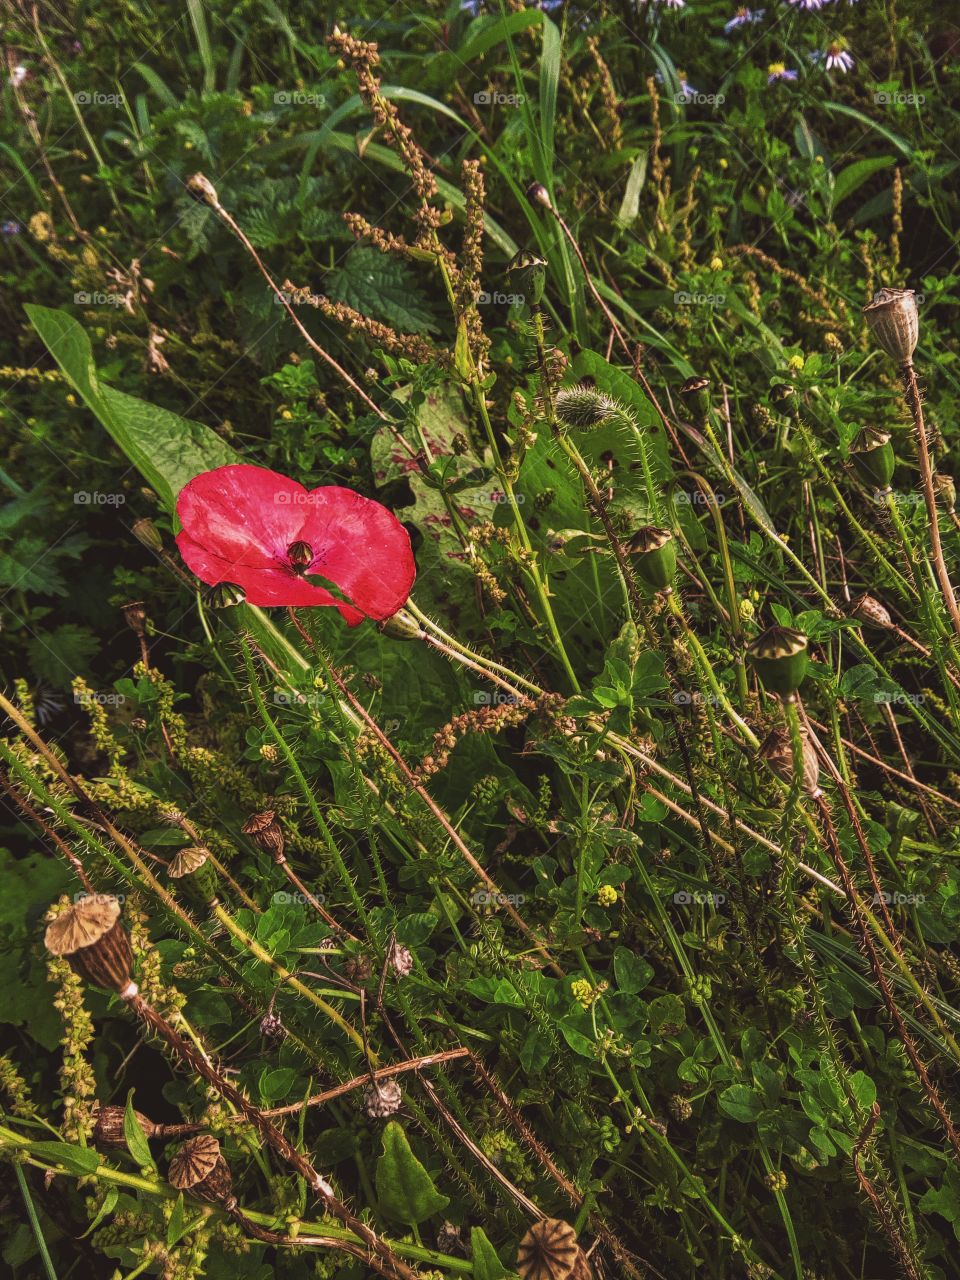 I found a huge mass of poppy's by an abandoned factory, and I was stunned by the contrast: something void of attention and life, but surrounded by these beautiful flowers. This one stood out because it was away from the others, surrounded by weeds.